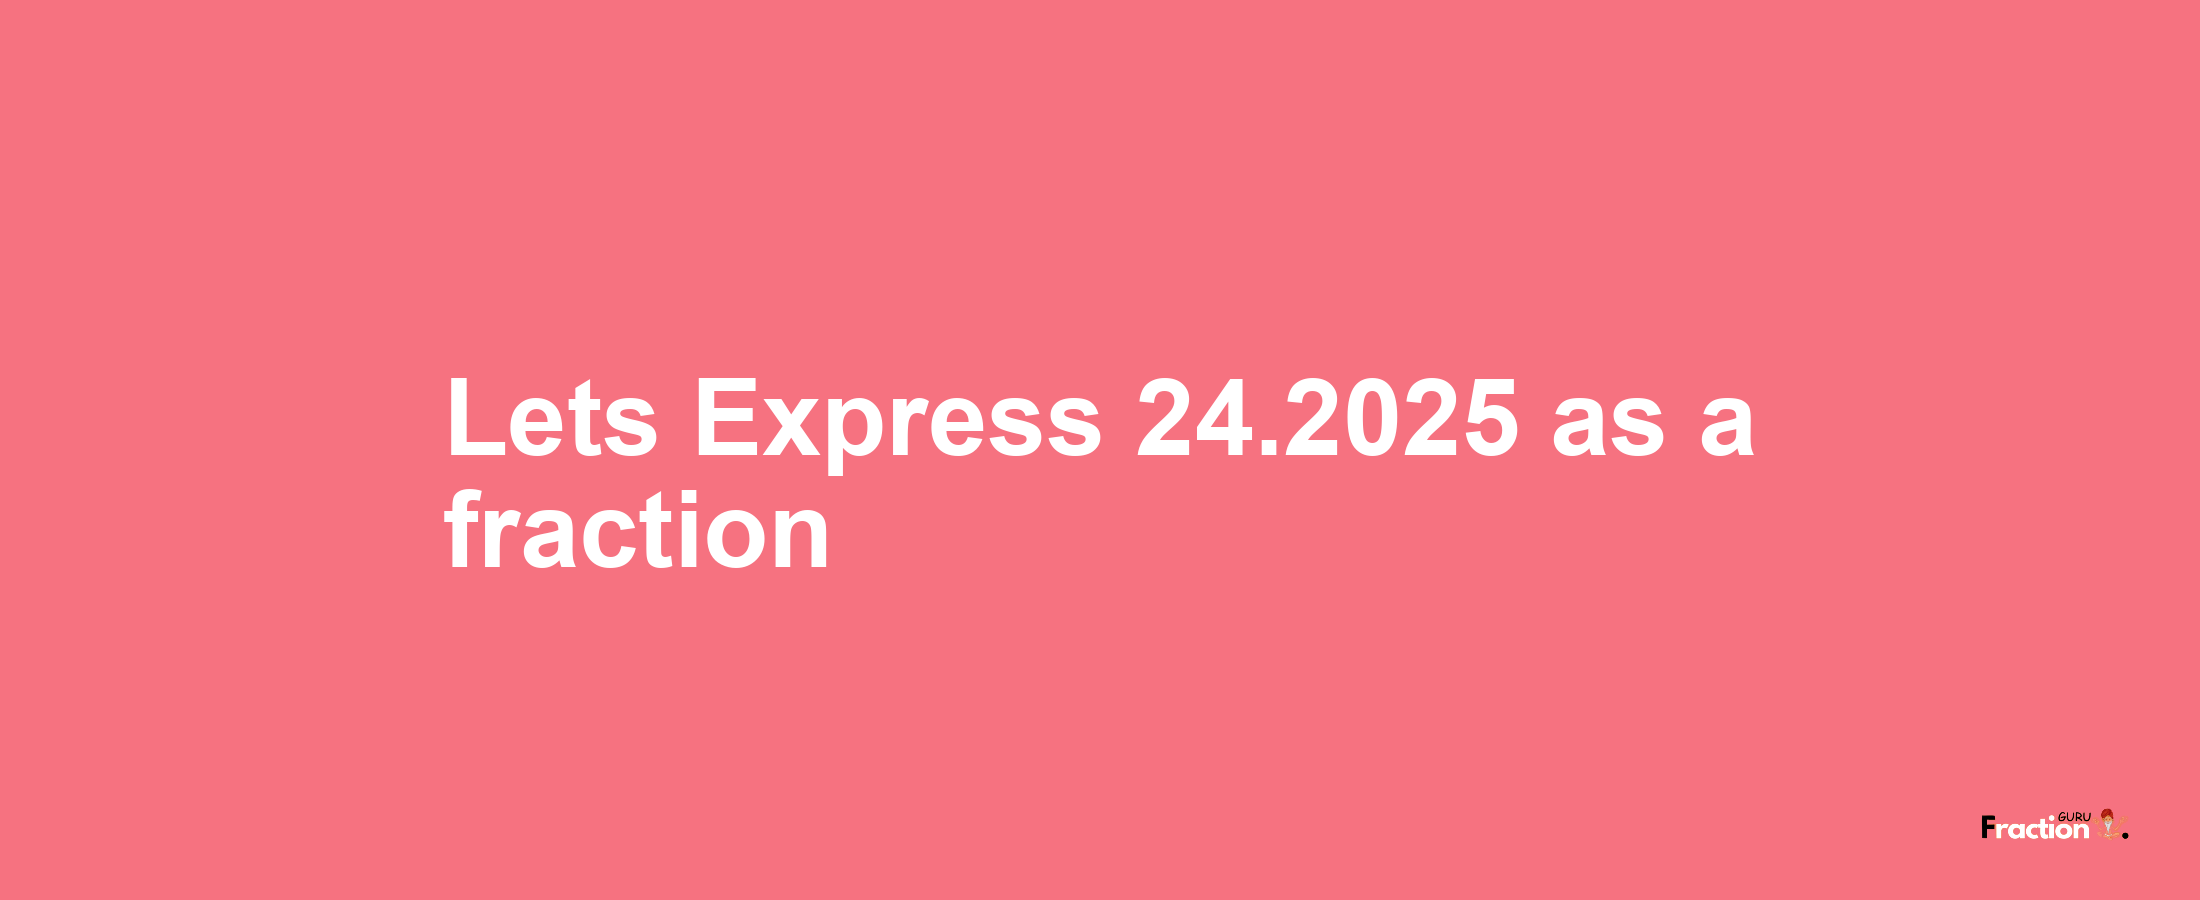 Lets Express 24.2025 as afraction